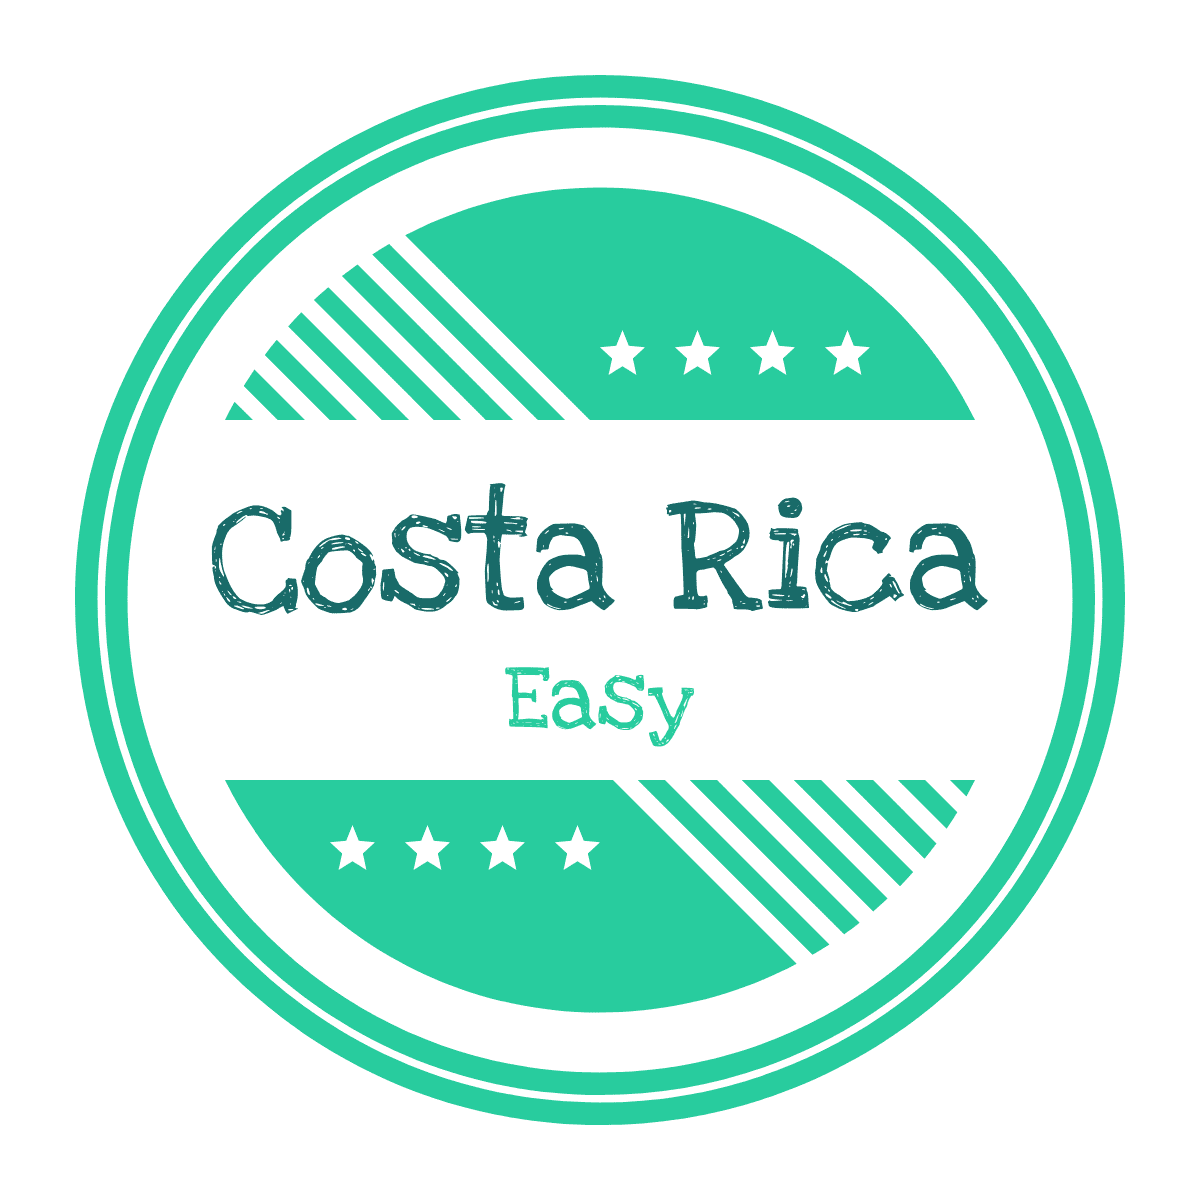 Where to exchange money in Costa Rica? Costa Rica Easy